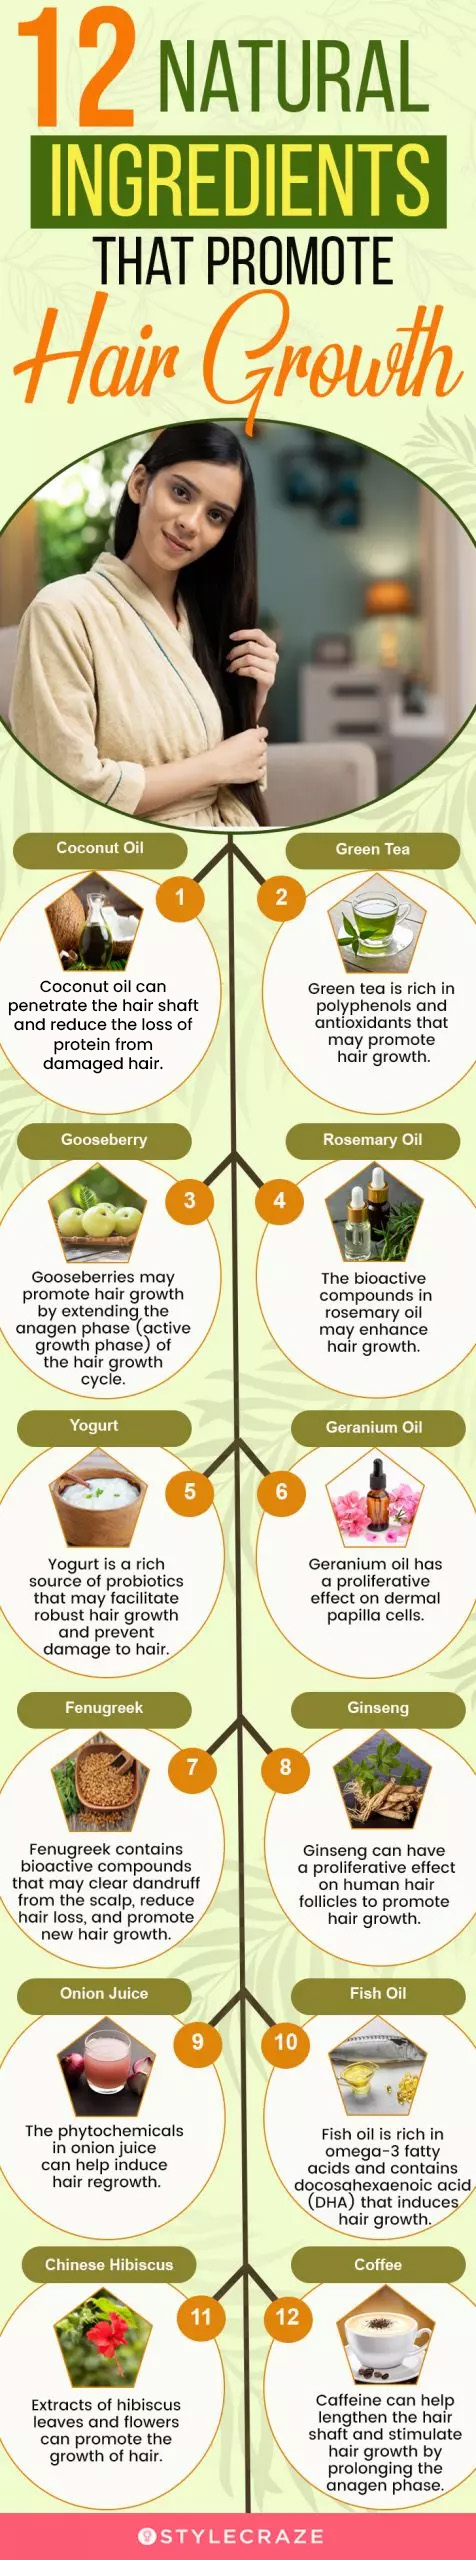 Hair Loss: 3 Simple Home Remedies To Prevent Hair Thinning - NDTV Food